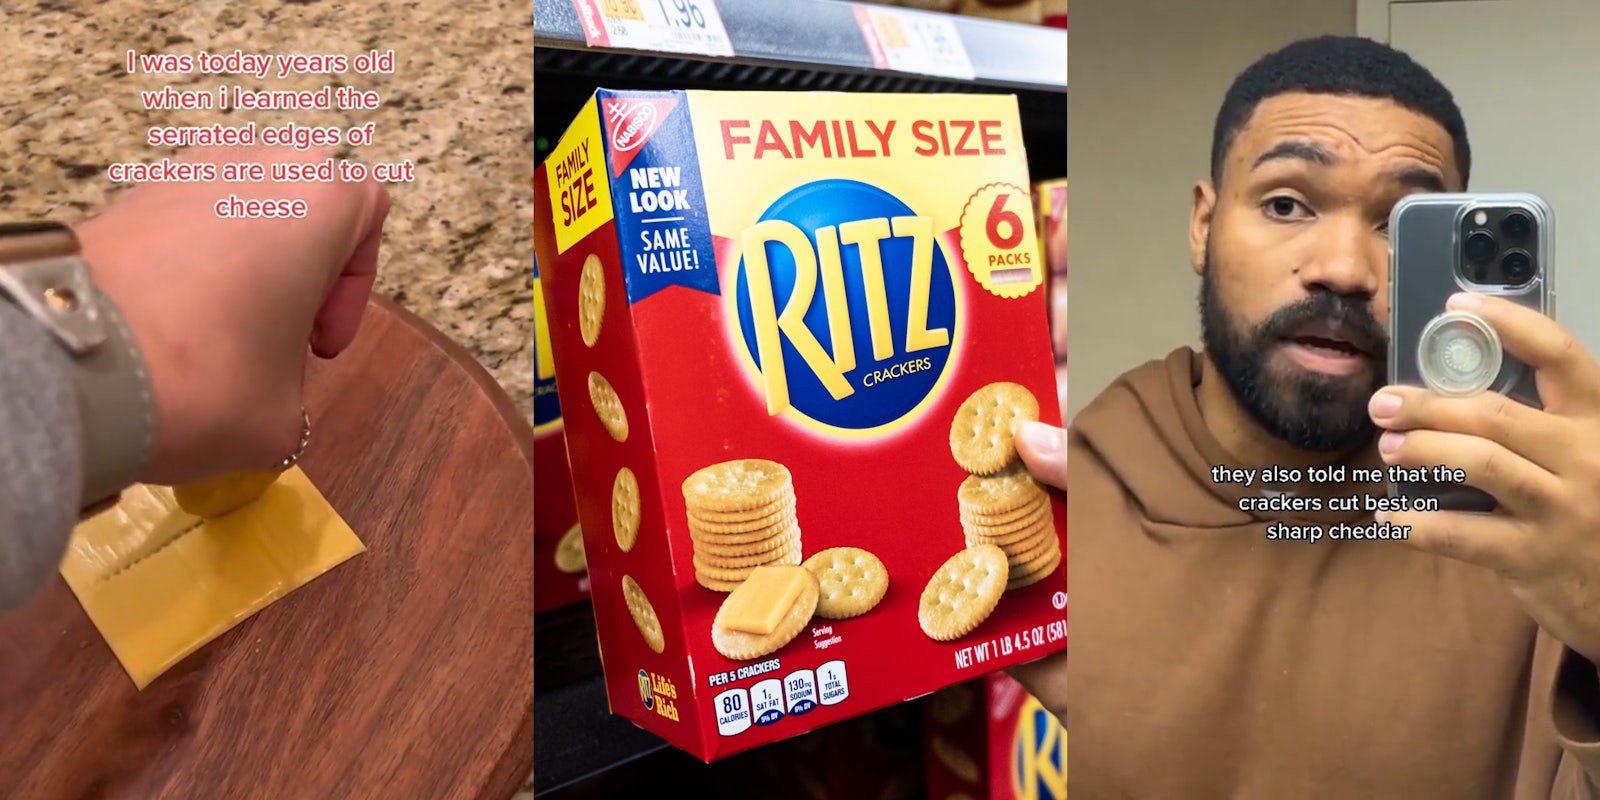 person using Ritz cracker to cut cheese with caption 'I was today years old when I learned the serrated edges of crackers are used to cut cheese' (l) Ritz crackers in store in hand (c) person speaking in bathroom mirror with caption 'they also told me that the crackers cut best on sharp cheddar' (r)